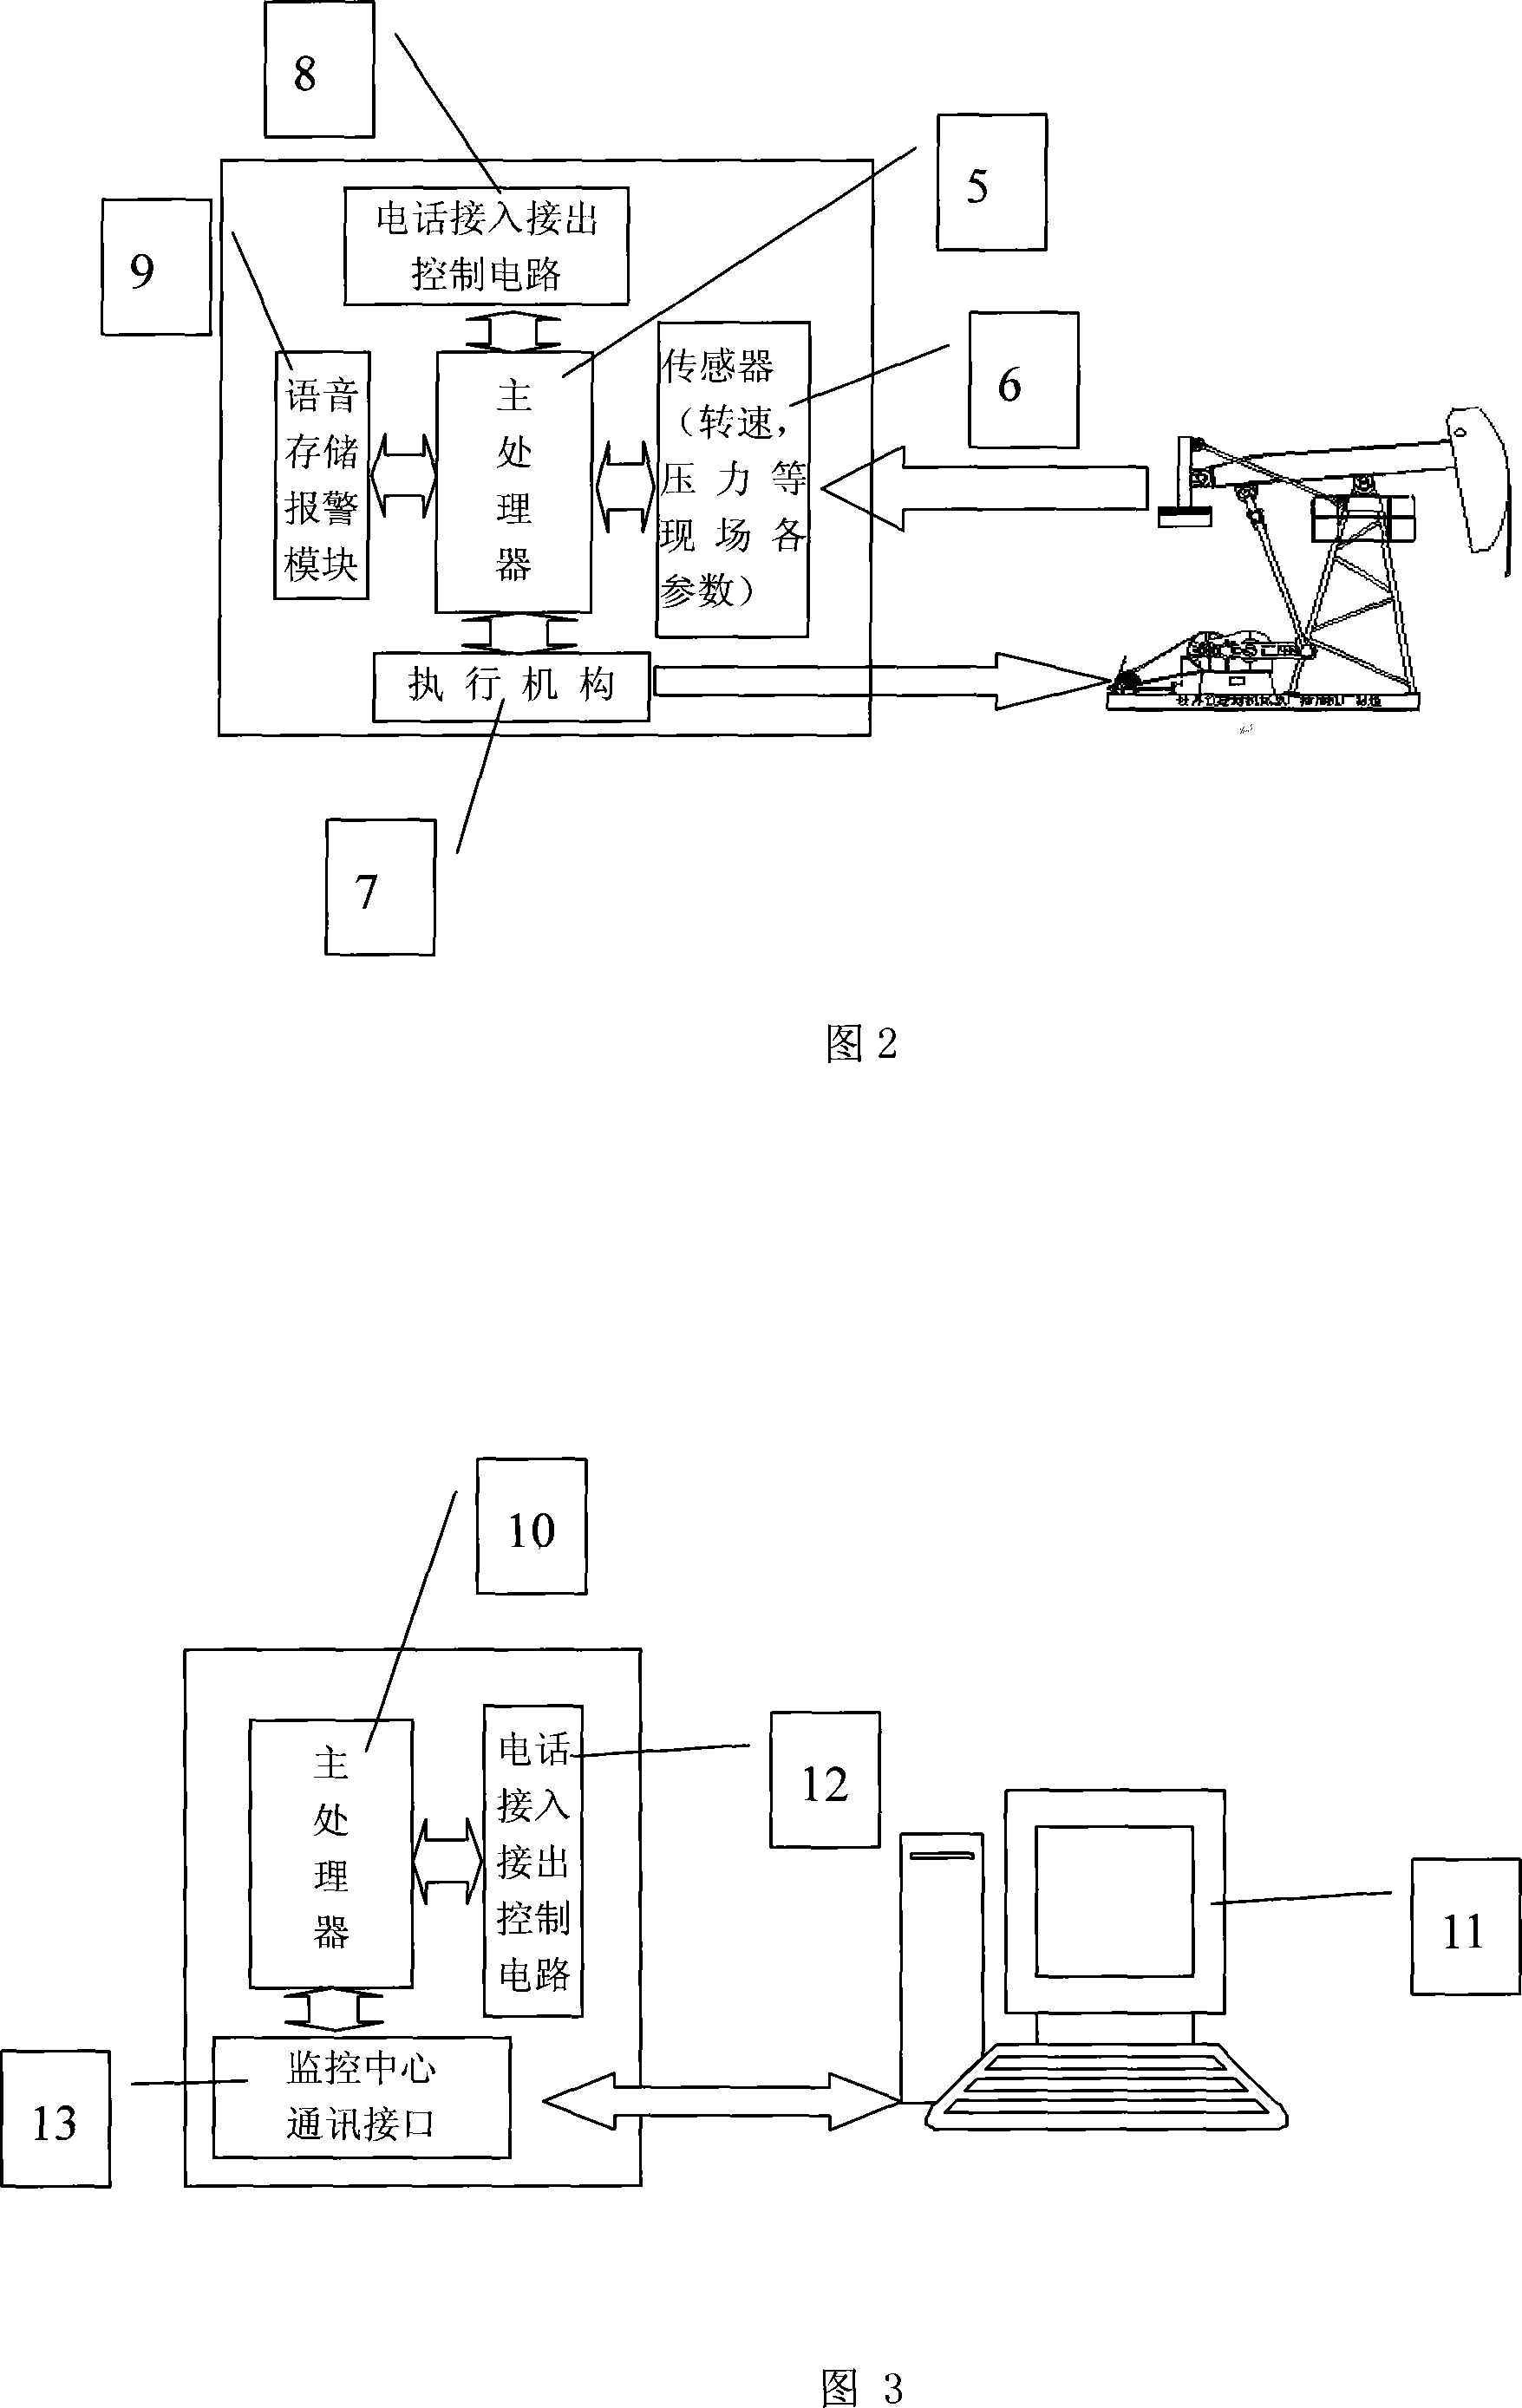 Pumpingunit long-distance information transmission and control device and control method